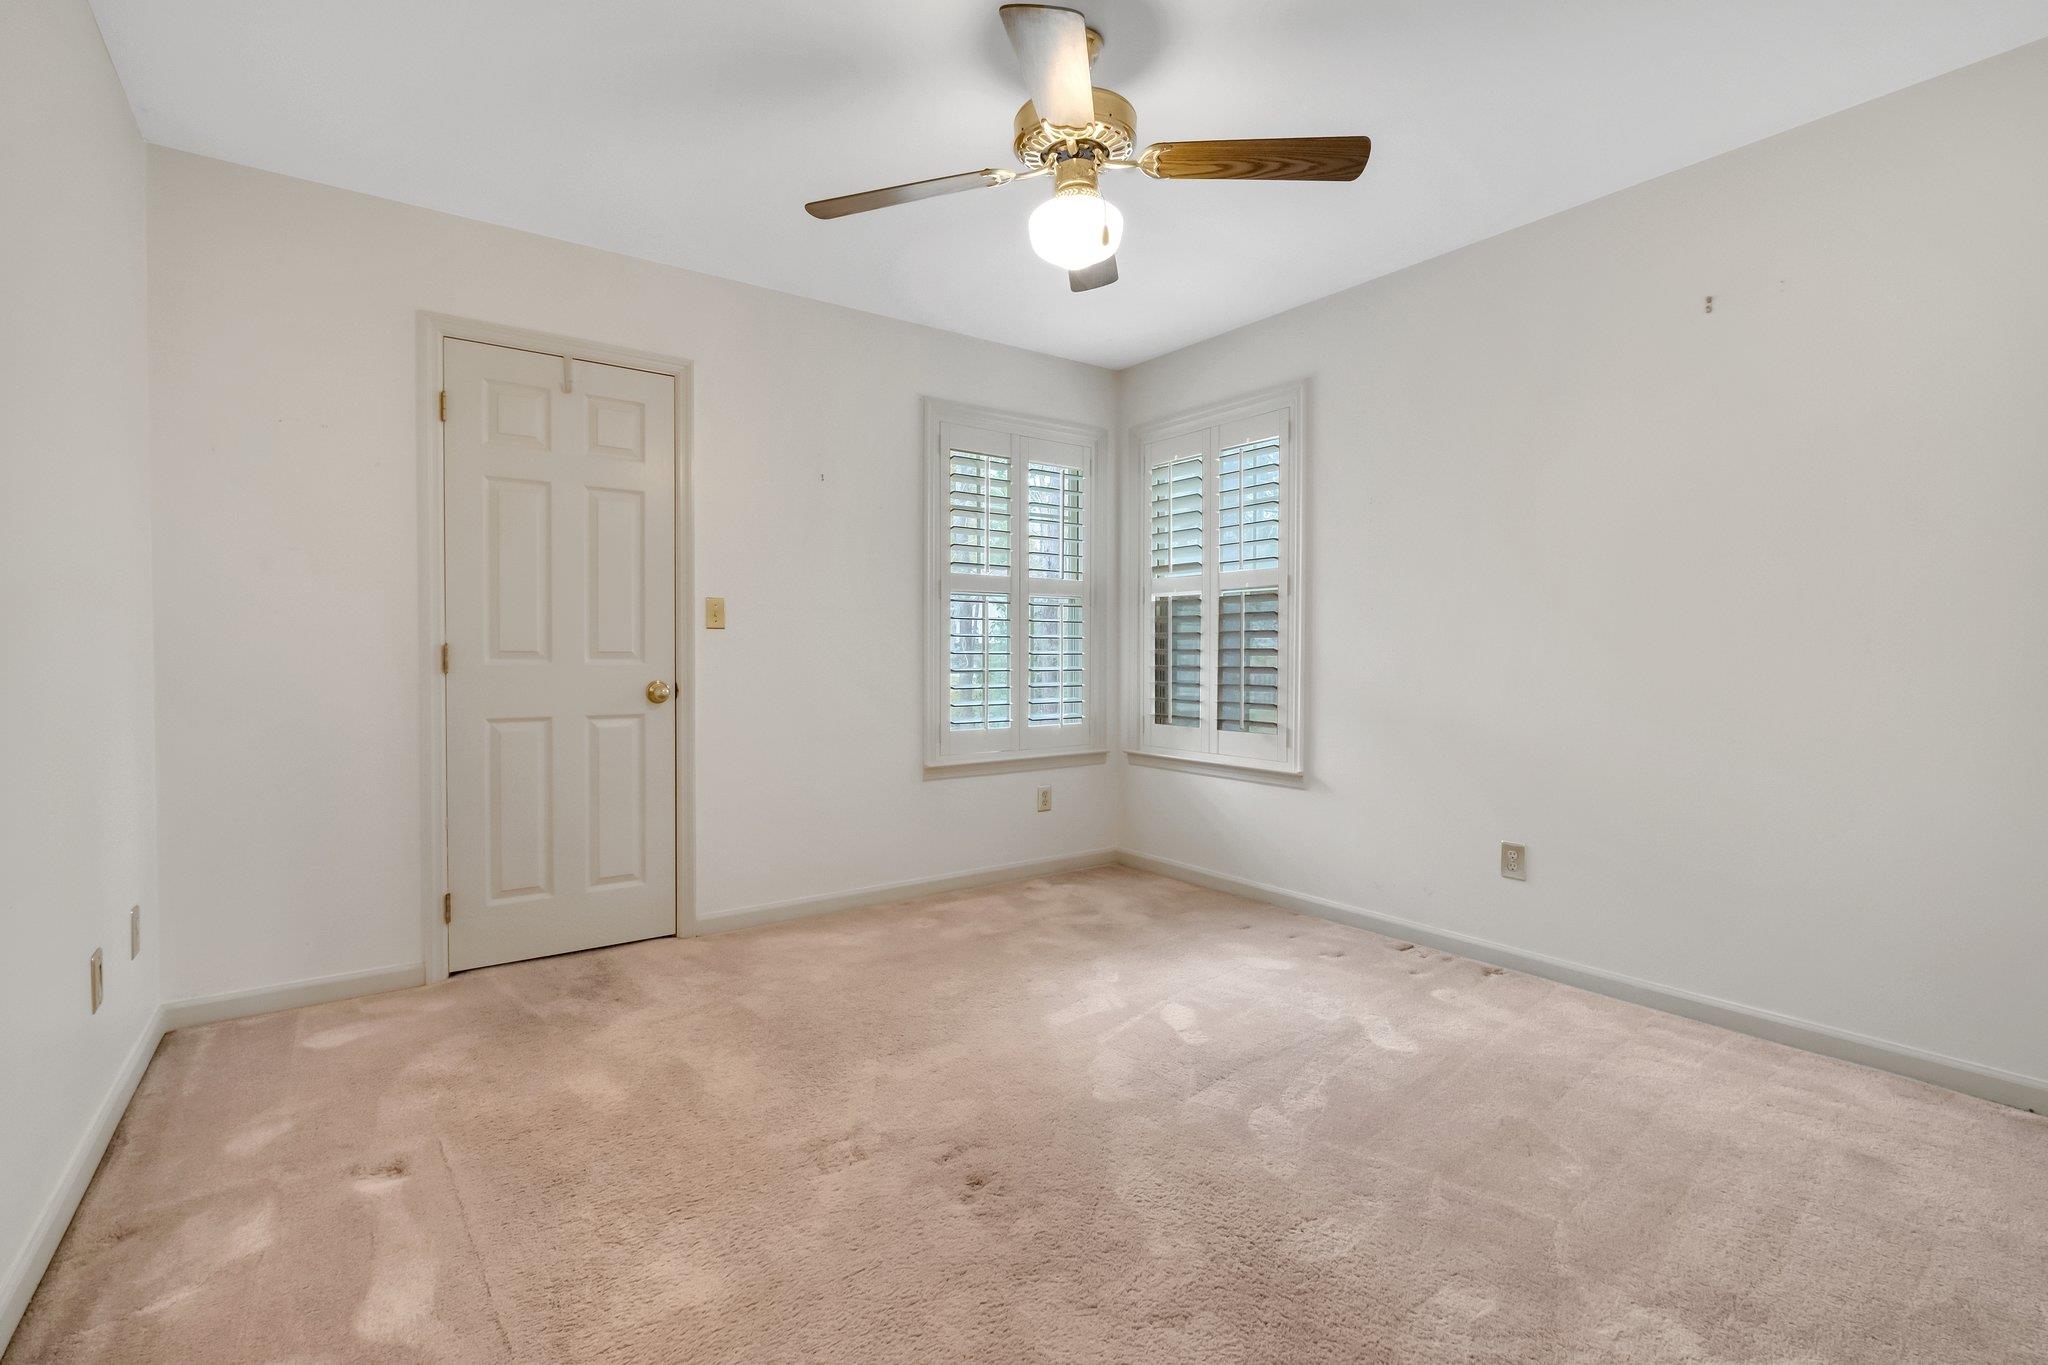 3510 Colonnade Drive,TALLAHASSEE,Florida 32309,4 Bedrooms Bedrooms,2 BathroomsBathrooms,Detached single family,3510 Colonnade Drive,369093